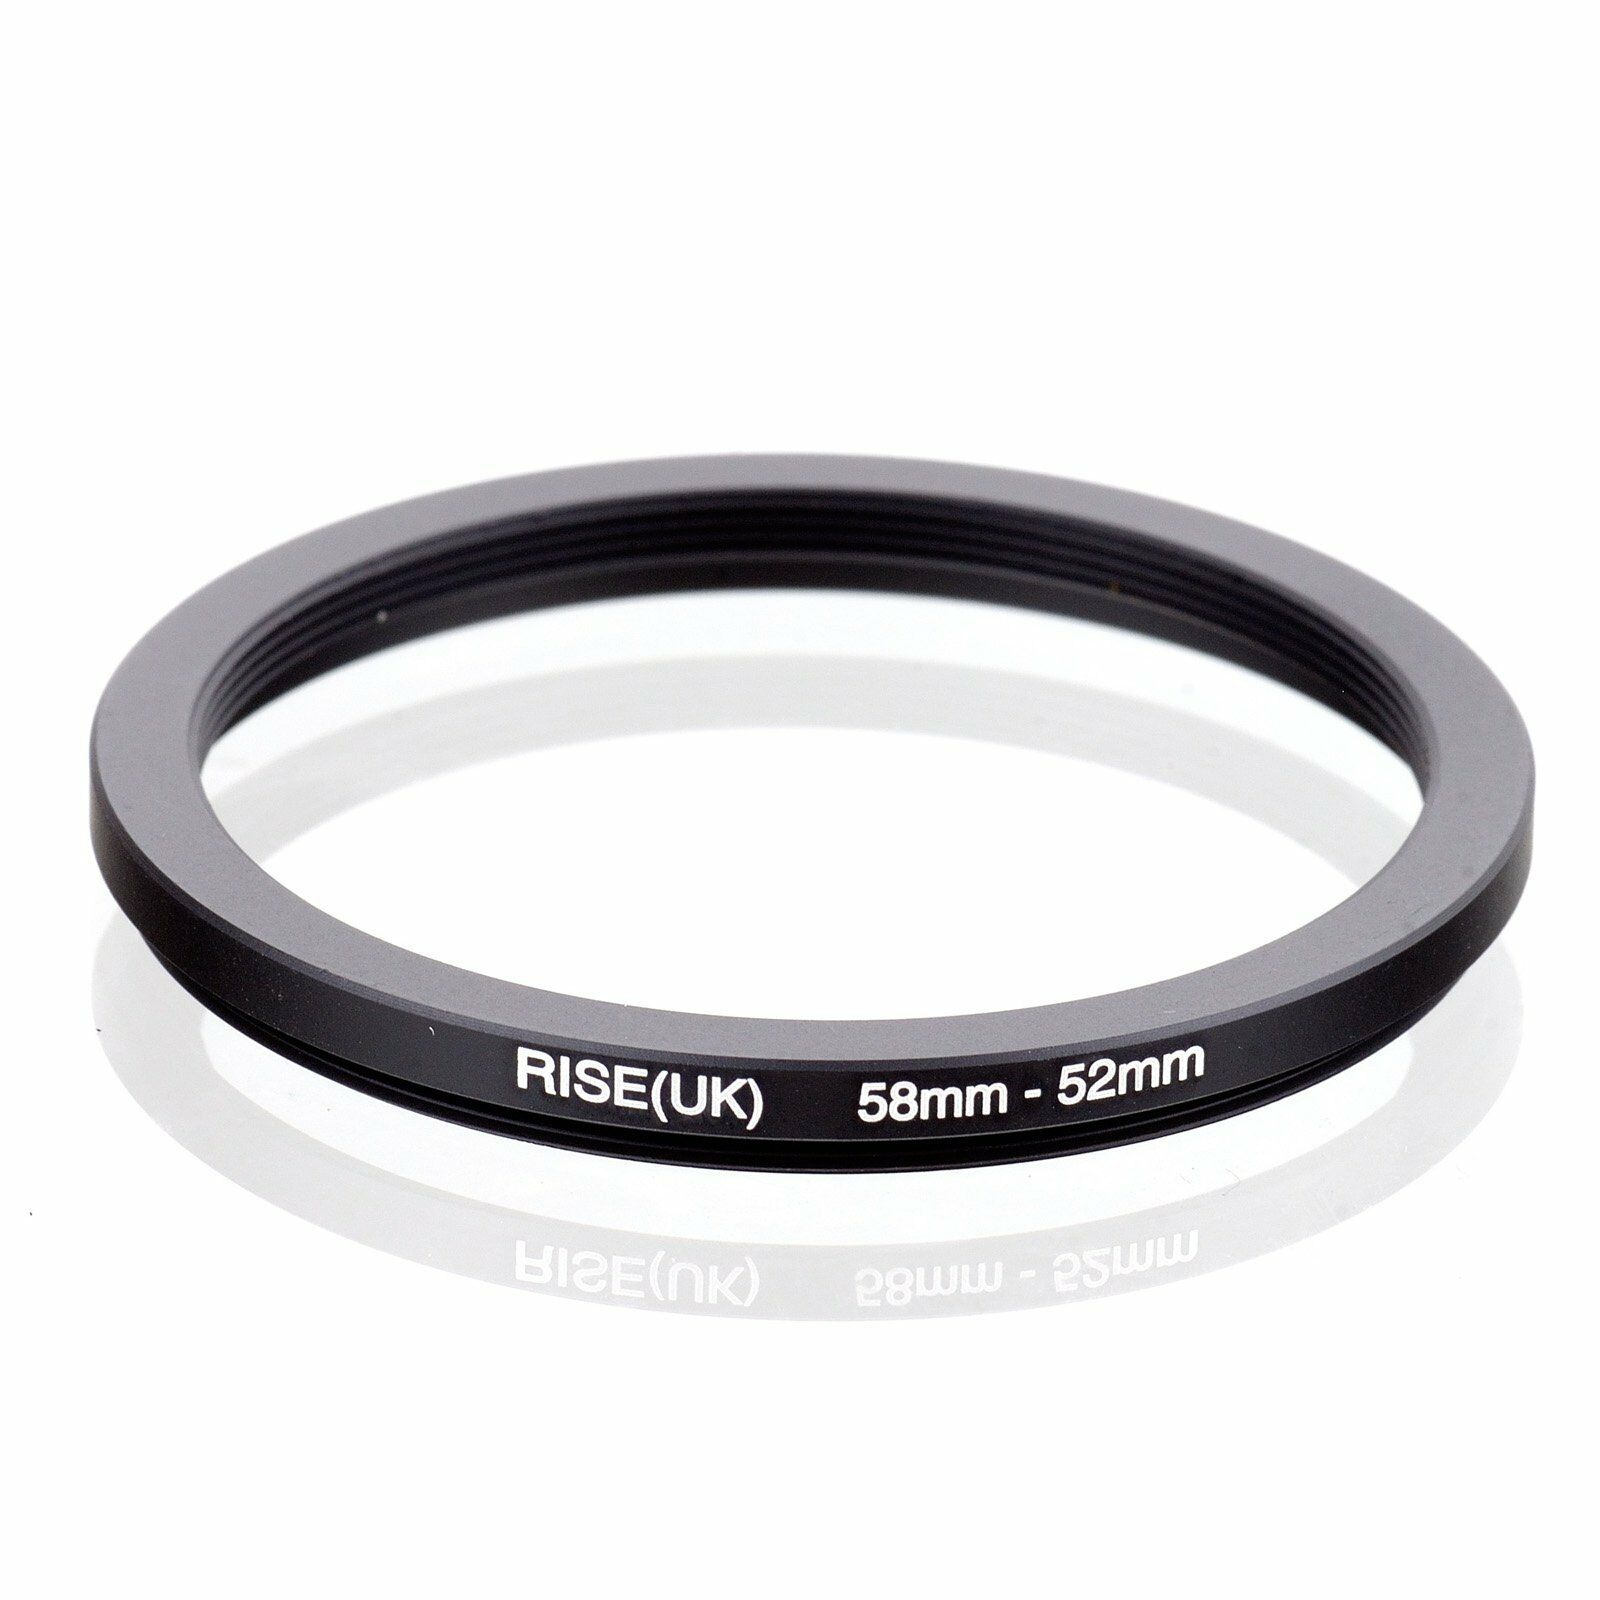 Rise(uk) 58mm-52mm 58-52 Mm 58 To 52 Step Down Ring Filter Adapter Black